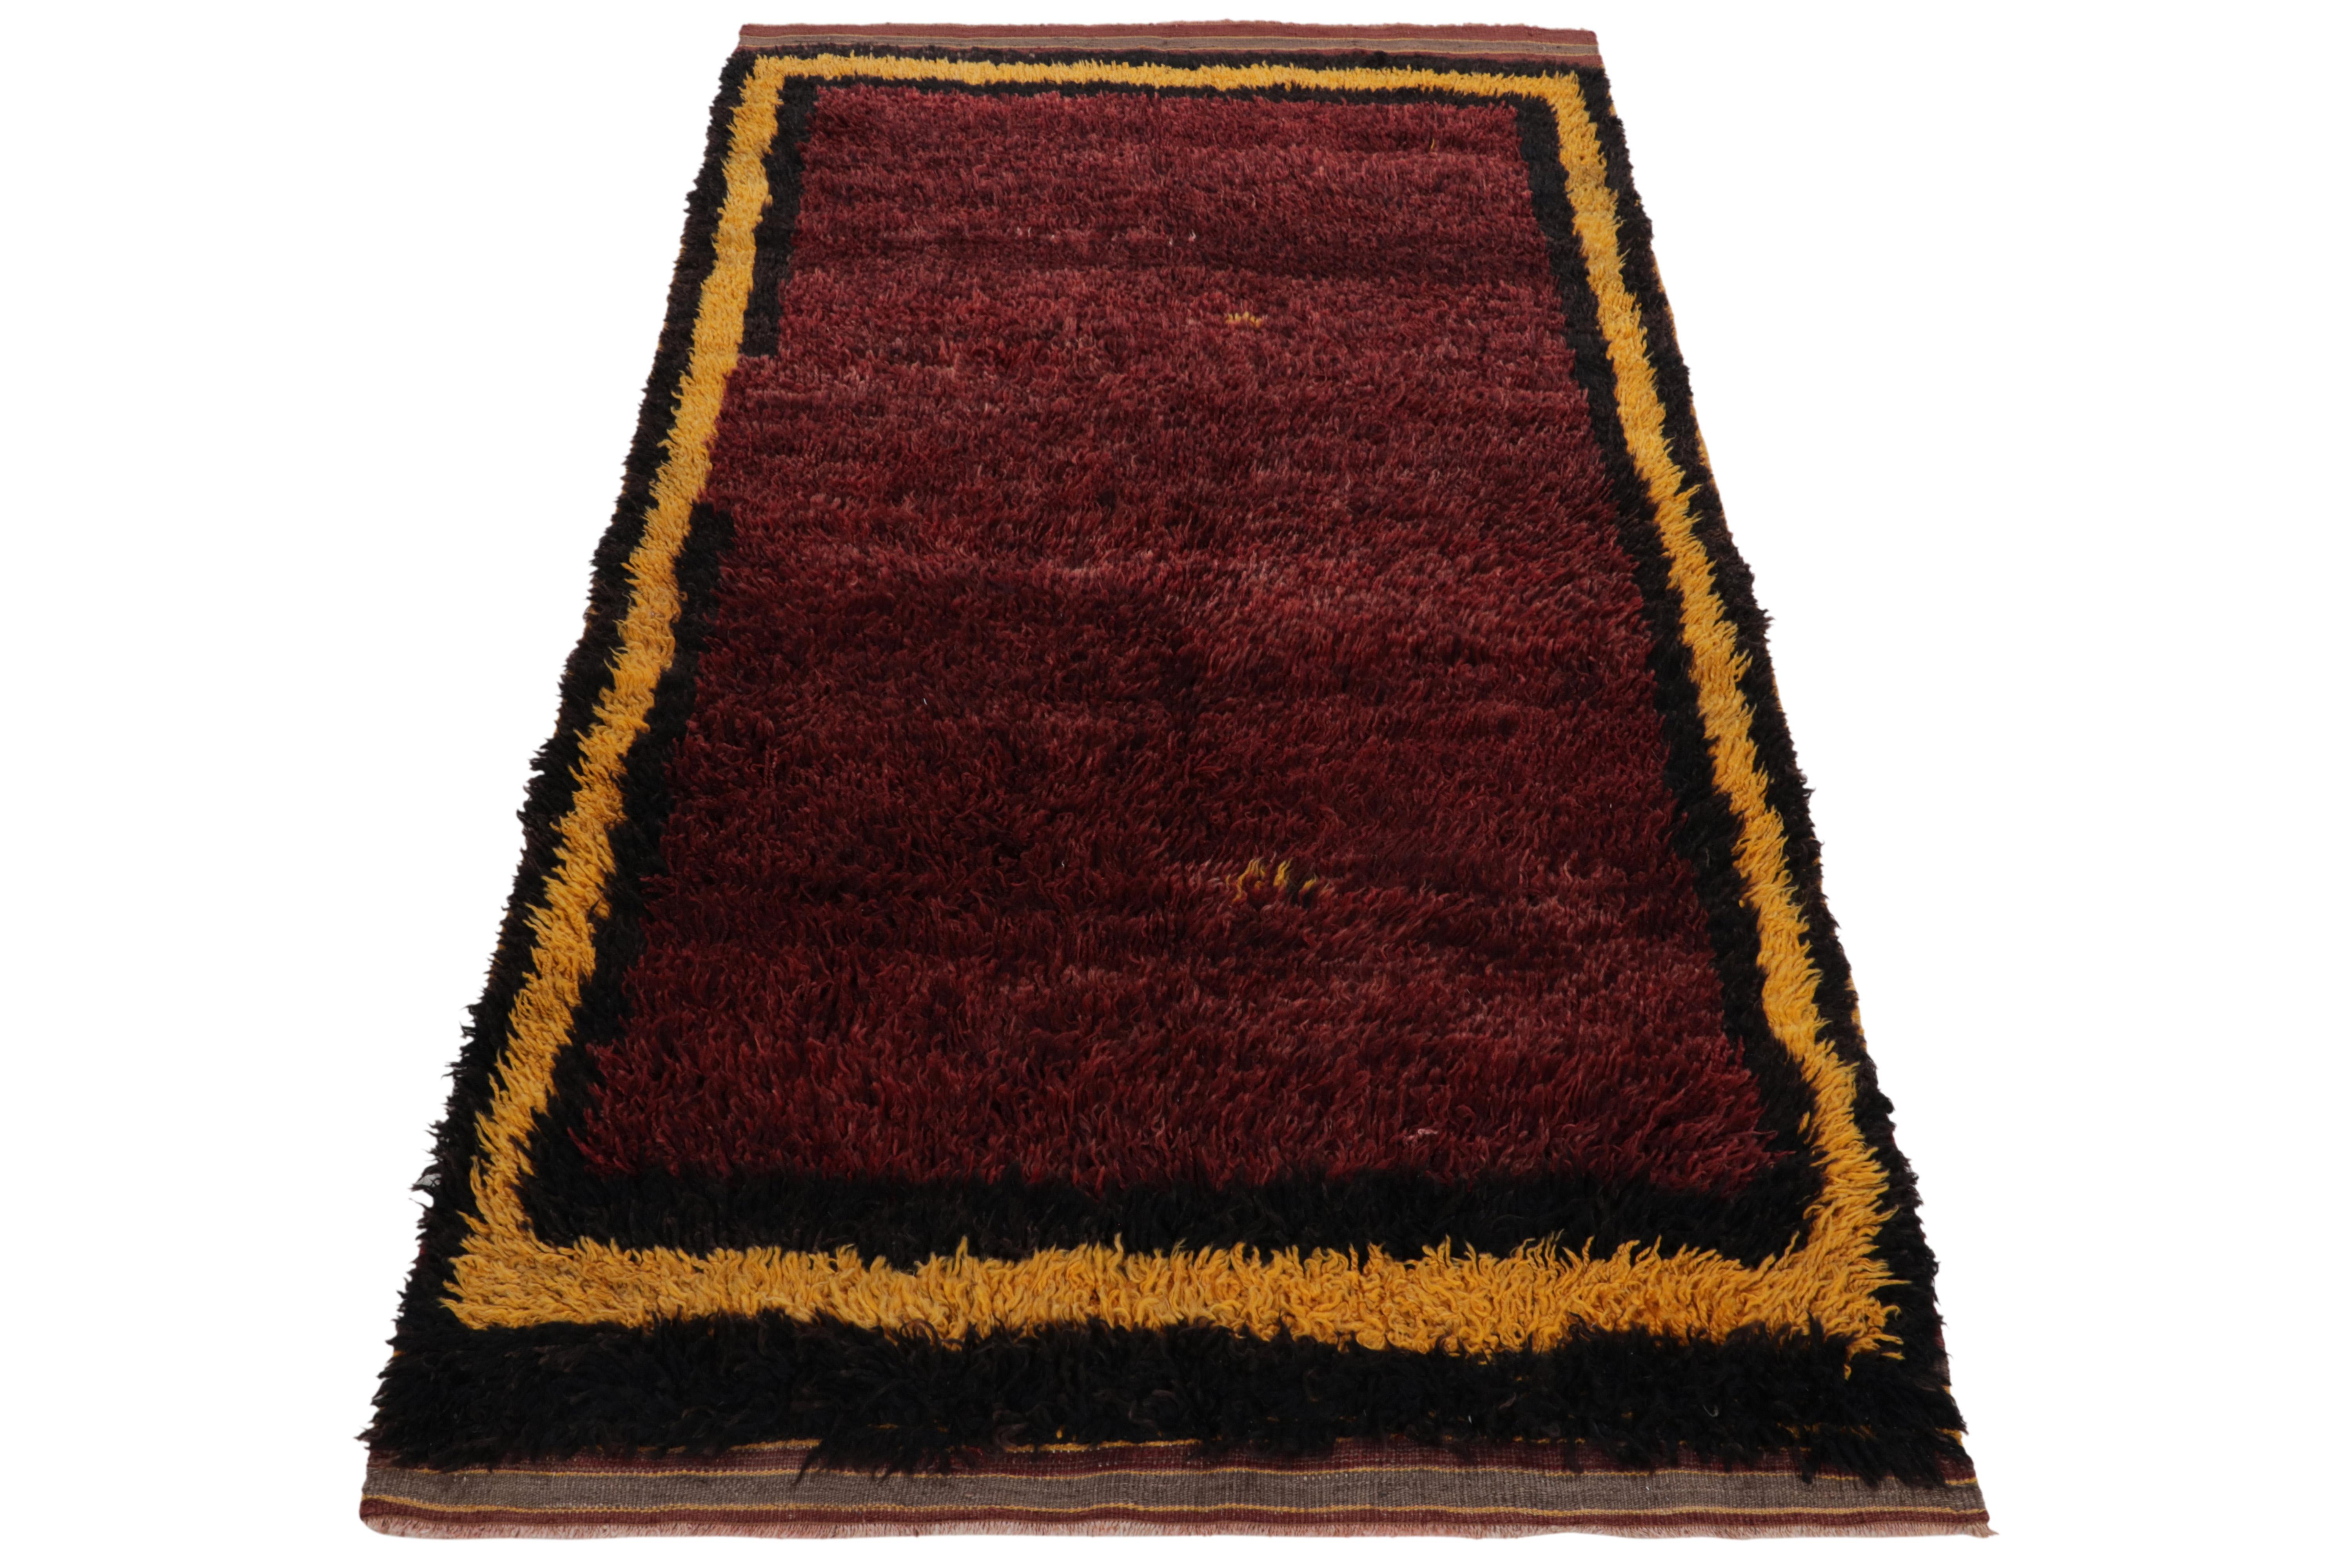 Hand-knotted in wool, a 4x7 vintage Tulu rug originating from Turkey circa 1950-1960, now joining Rug & Kilim’s Antique & Vintage collection. The healthy pile enjoys a solid maroon open field cocooned in alternating black & yellow borders.